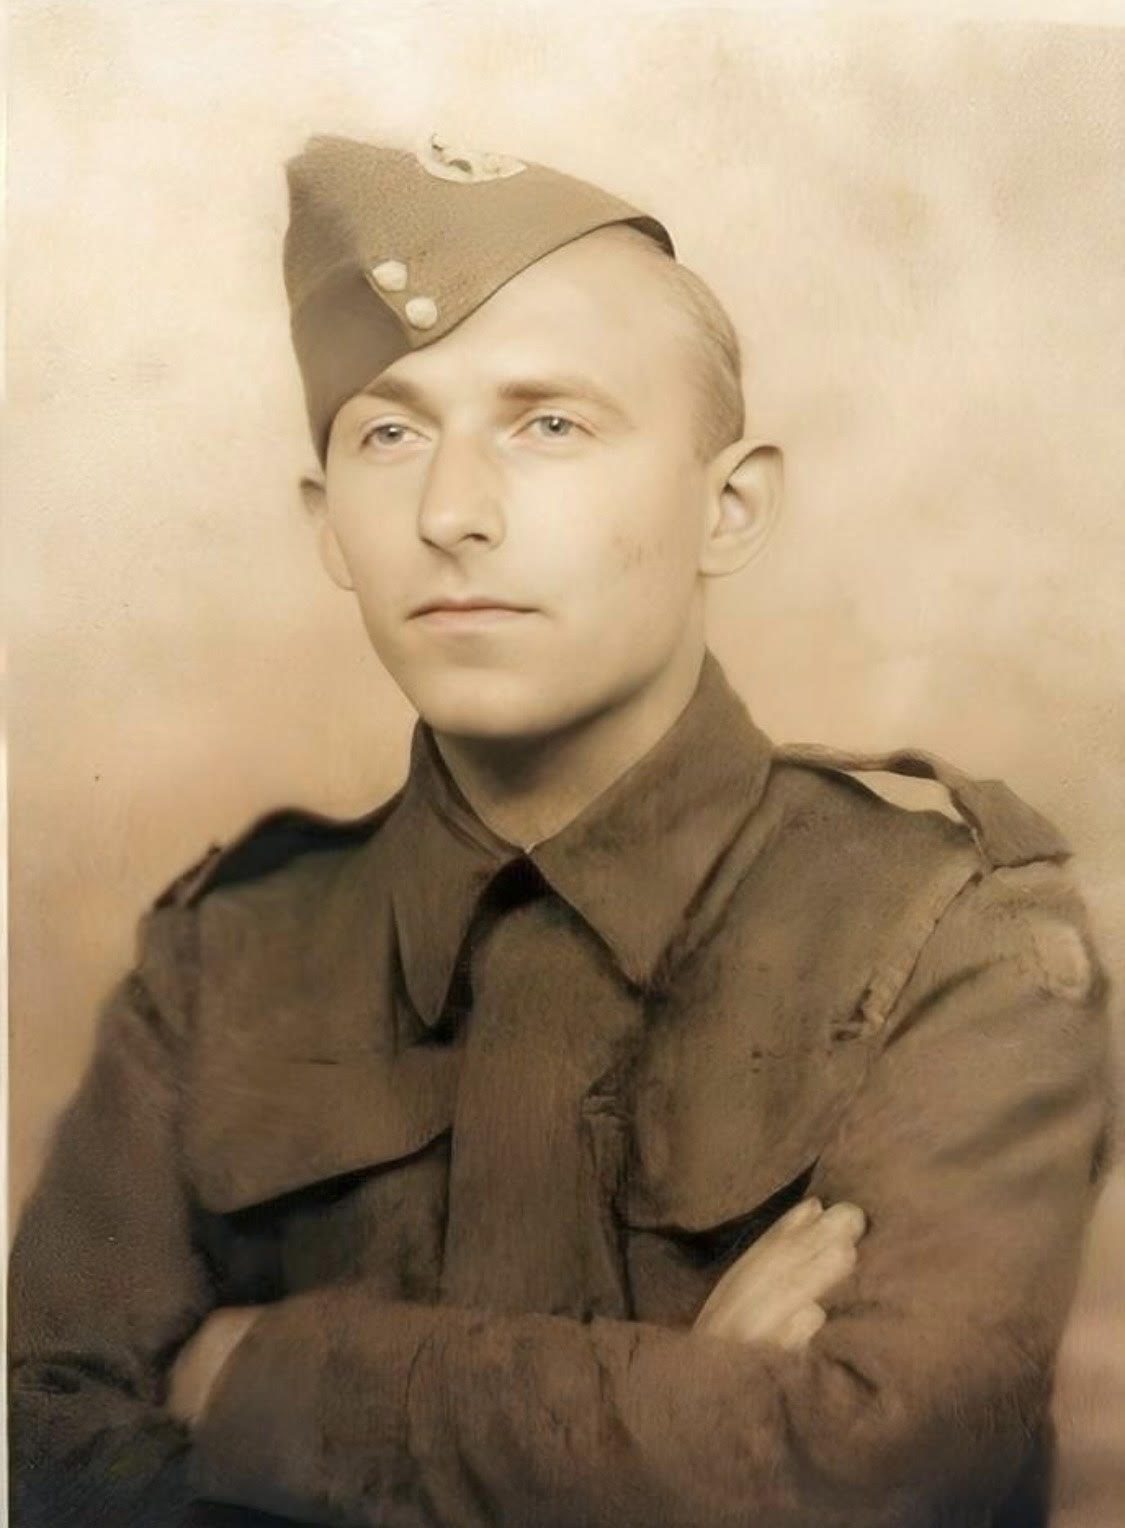 A Salford man and the D-Day landings 80 years ago